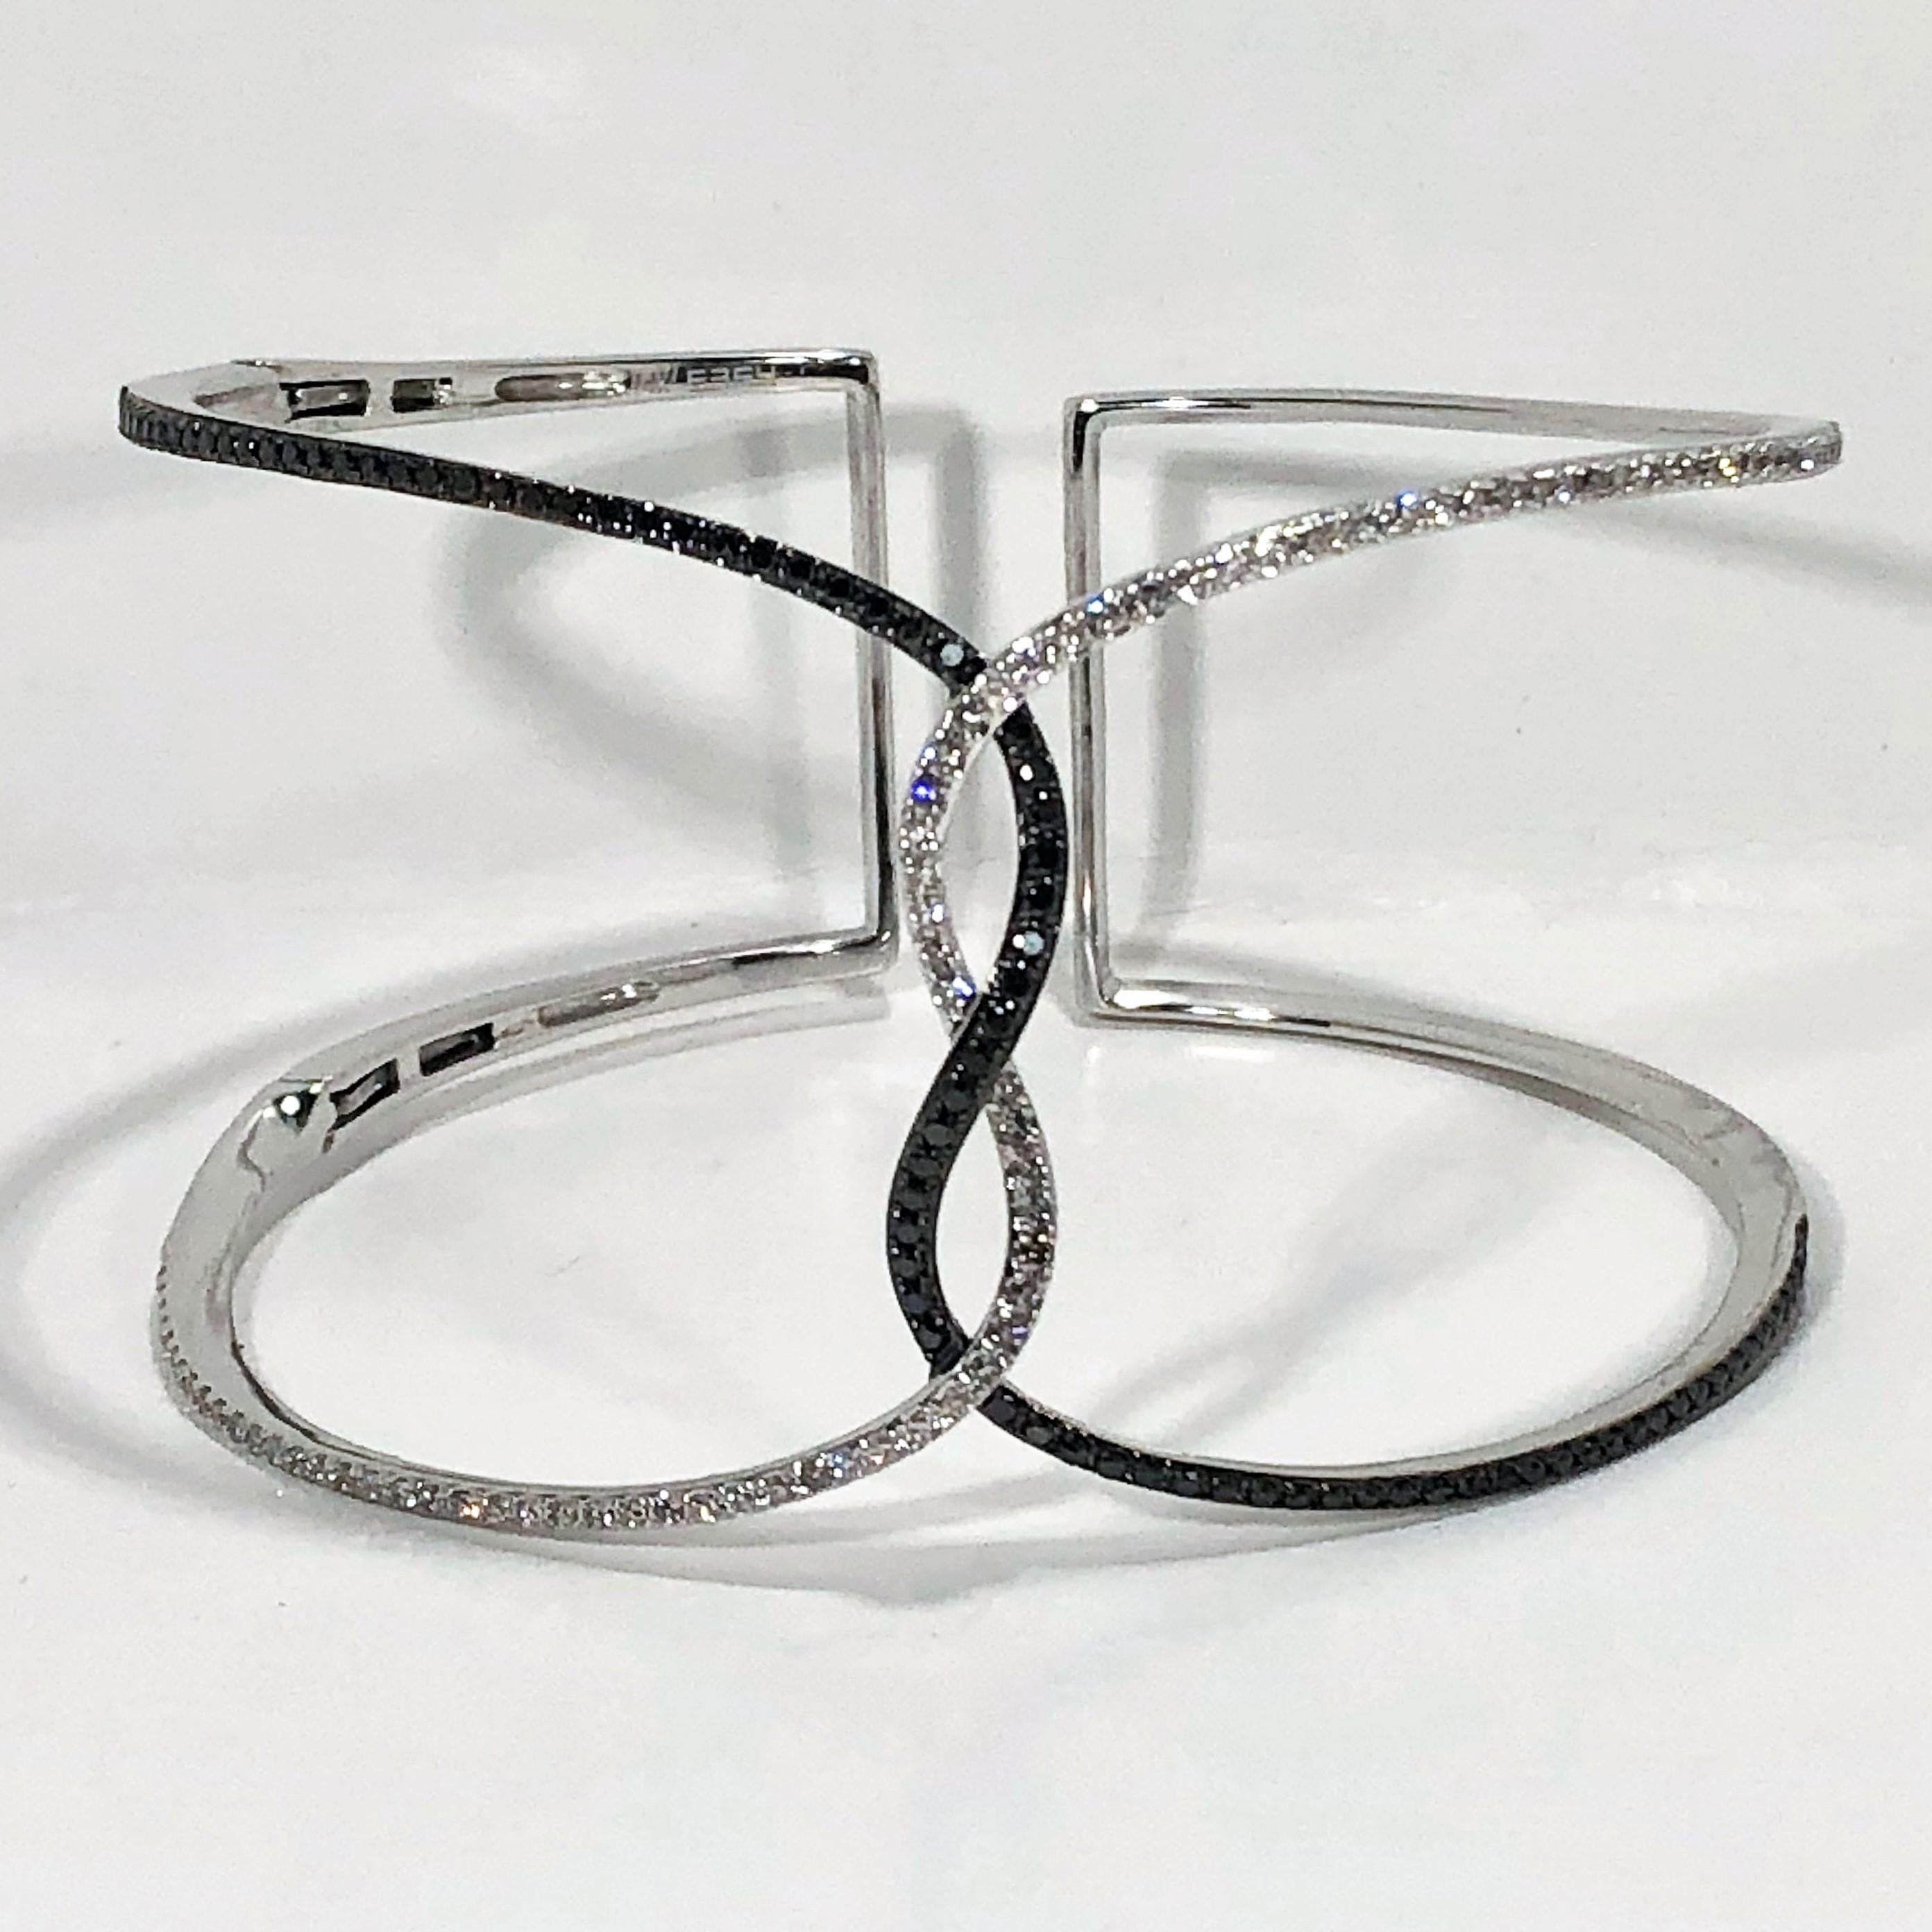 Stylish and lightweight, this easy to wear black and white diamond cuff by designer Effy is a great addition to your jewelry collection. Fashioned in 14k white gold and set with assorted black and white diamonds on the front side weighing an